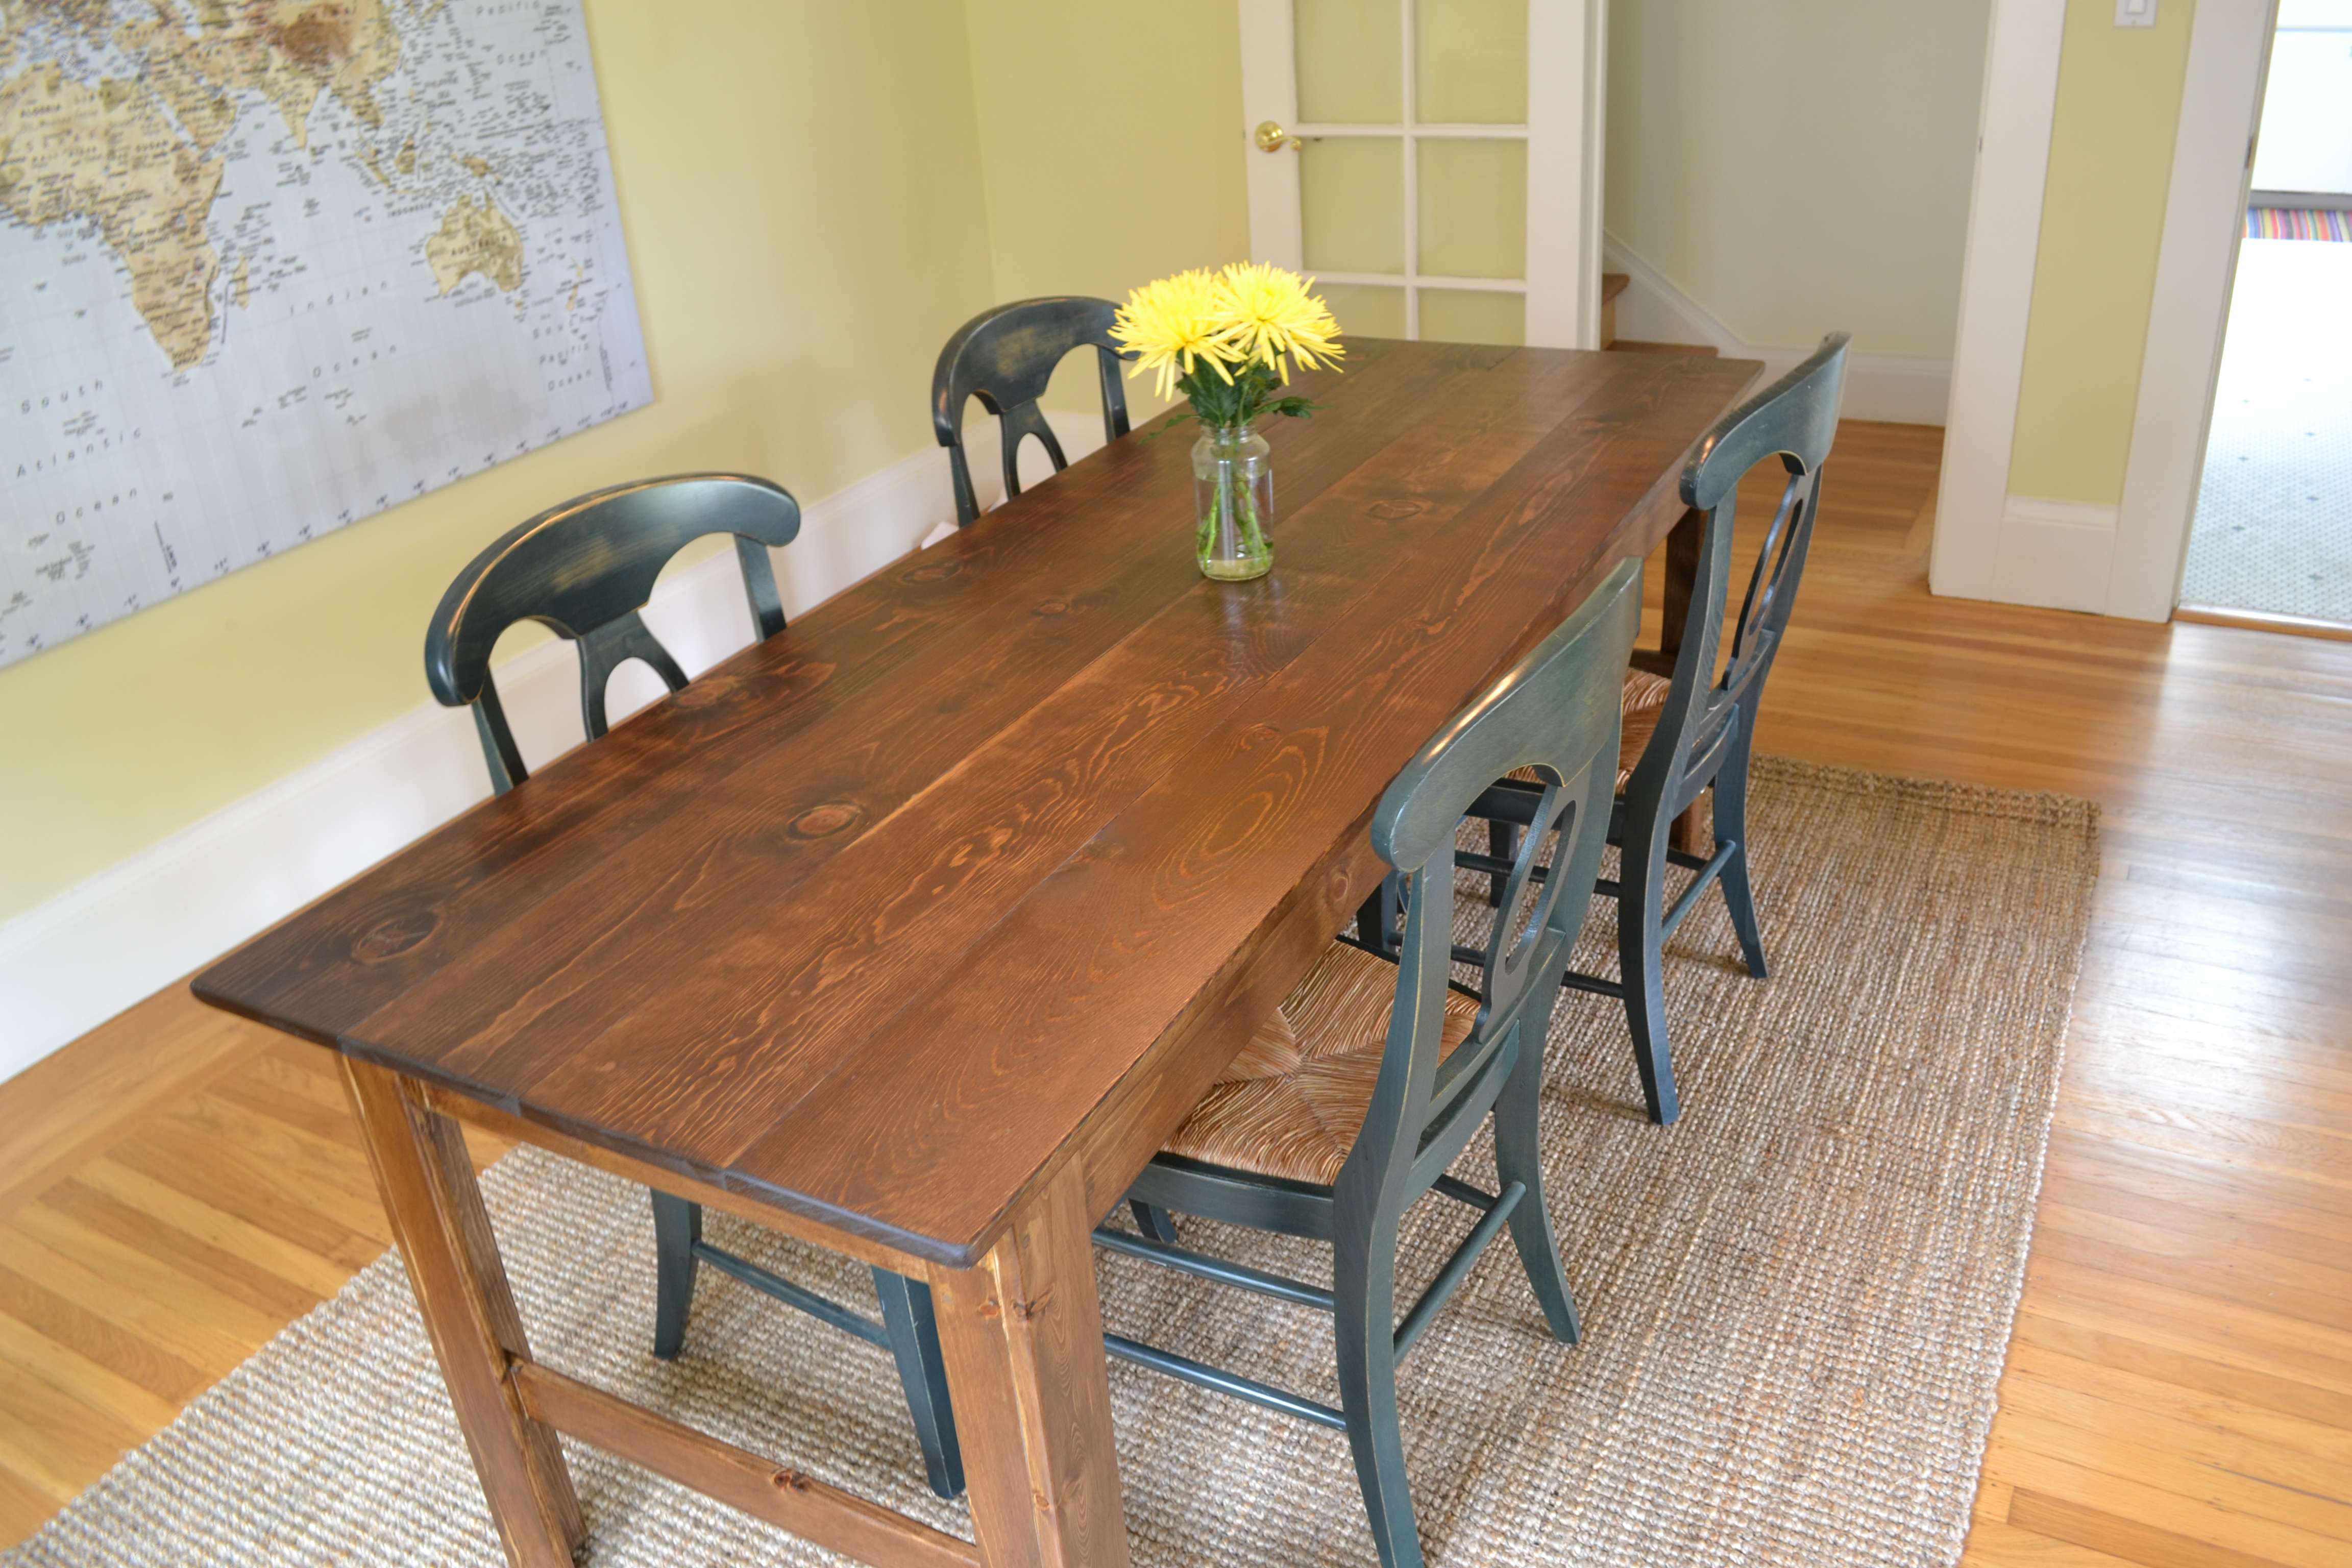 Narrow Dining Room Tables That Seat 6